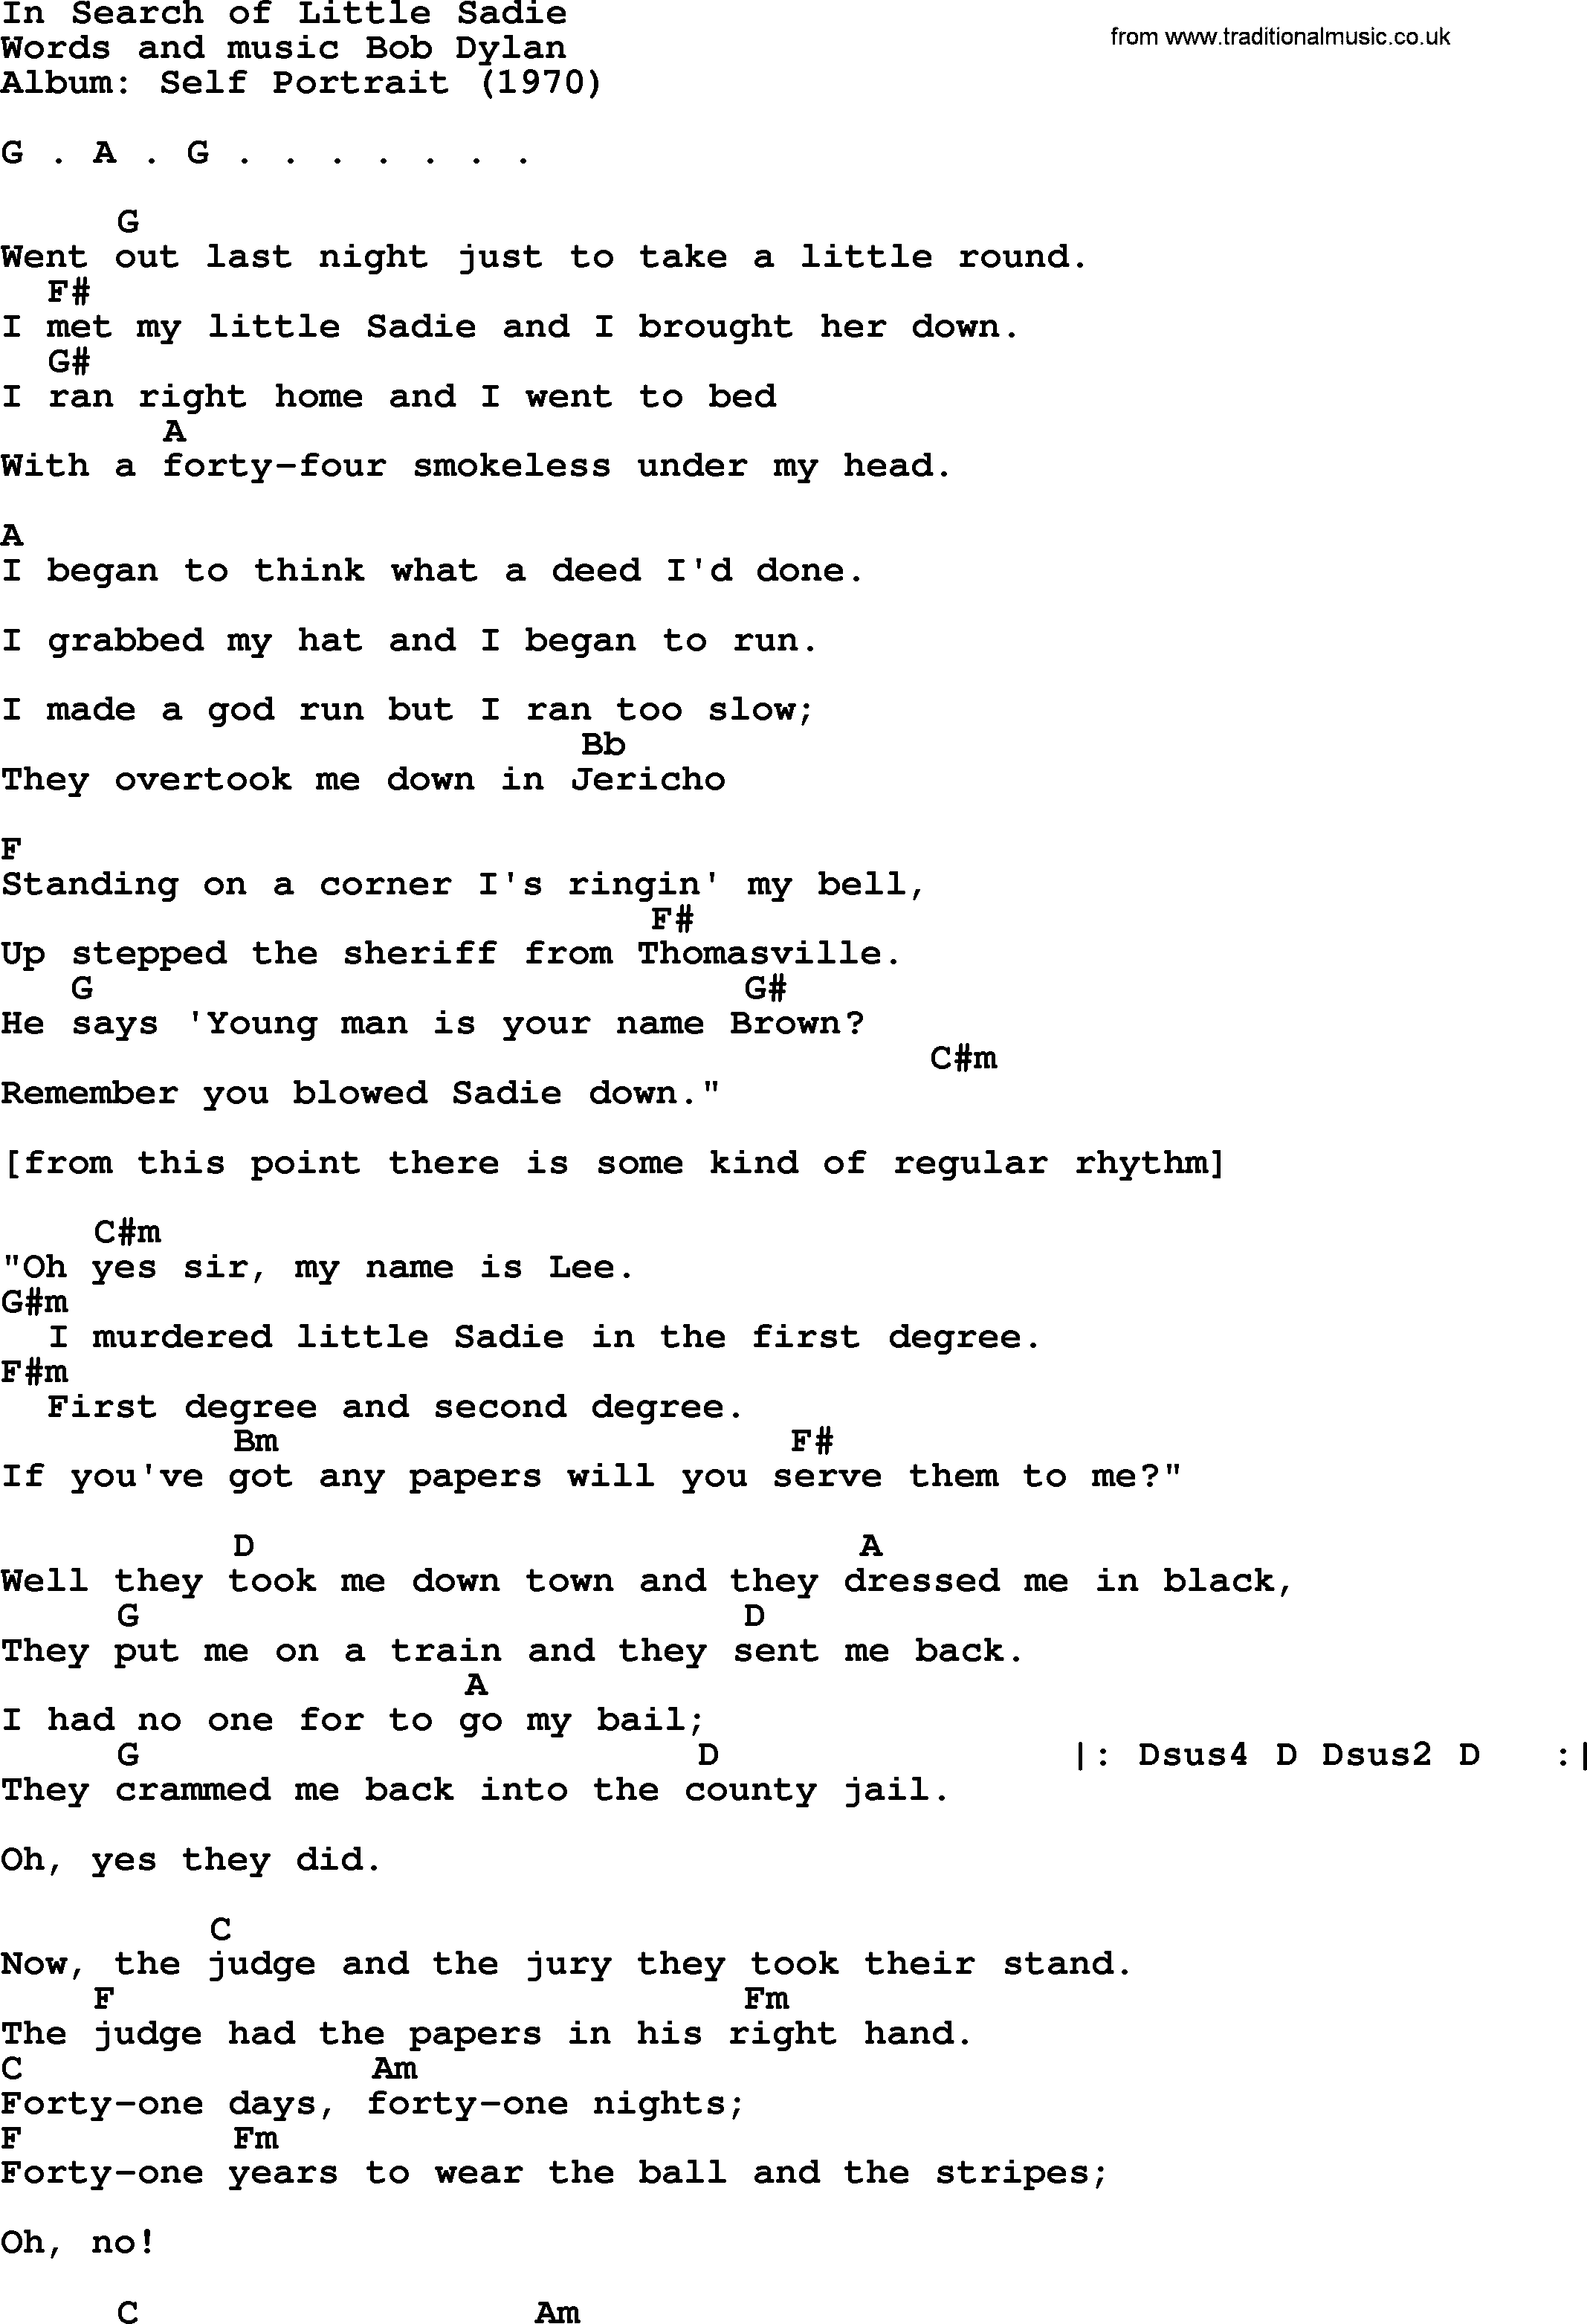 Bob Dylan song, lyrics with chords - In Search of Little Sadie